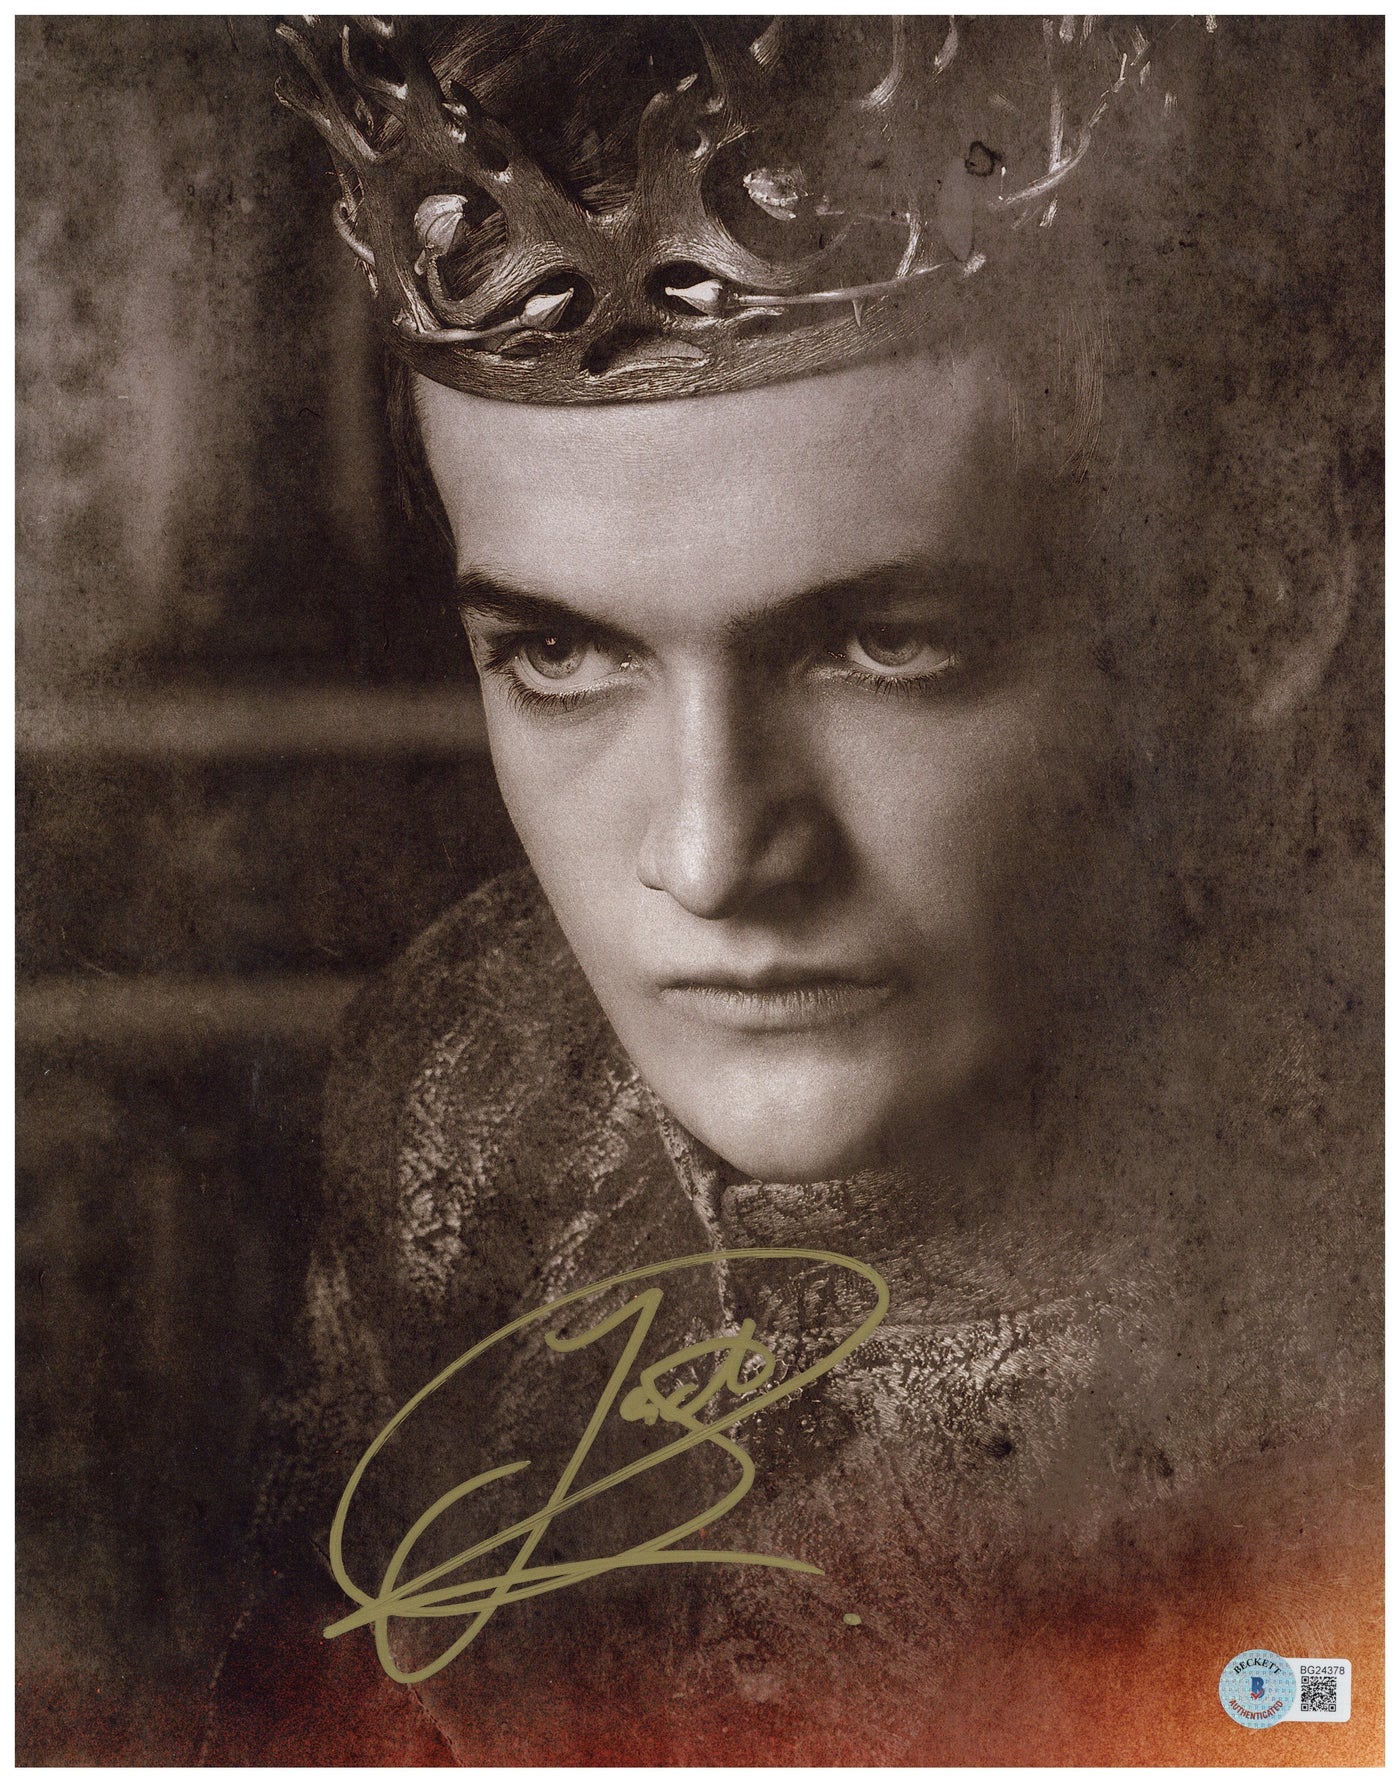 JACK GLEESON SIGNED 11X14 PHOTO GAME OF THRONES JOFFREY AUTOGRAPHED BAS #4